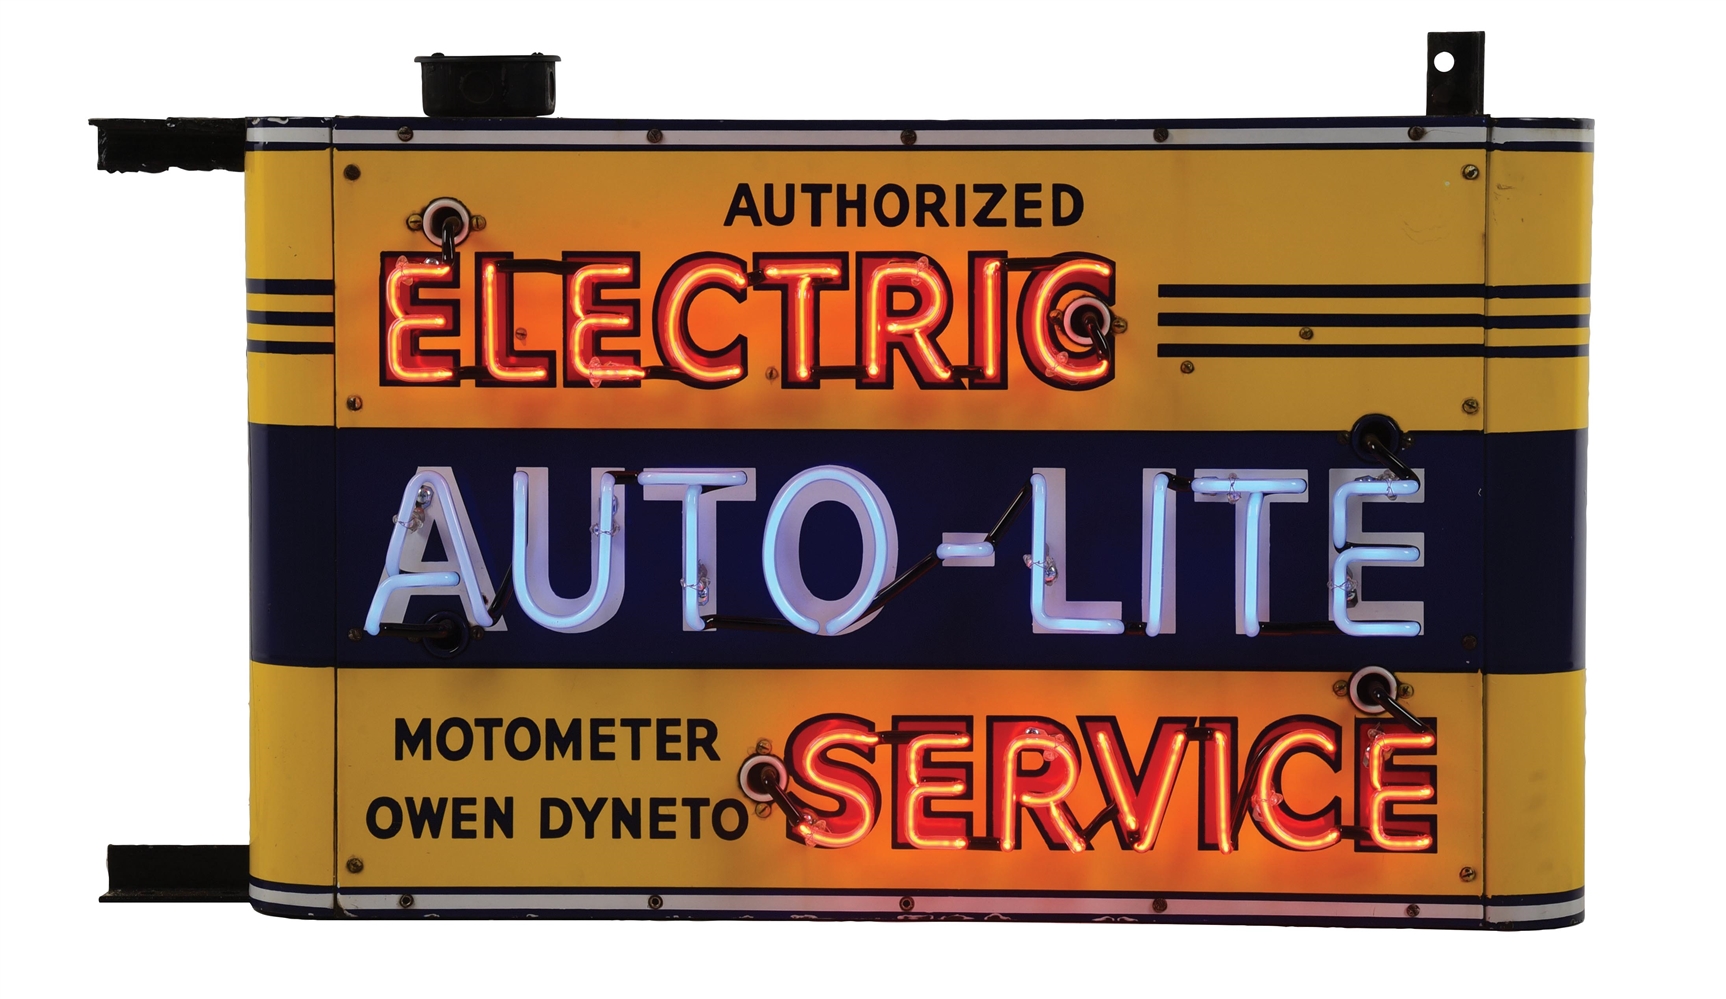 OUTSTANDING AUTO LITE ELECTRIC SERVICE PORCELAIN NEON SIGN W/ TWO BULLNOSE ATTACHMENTS. 